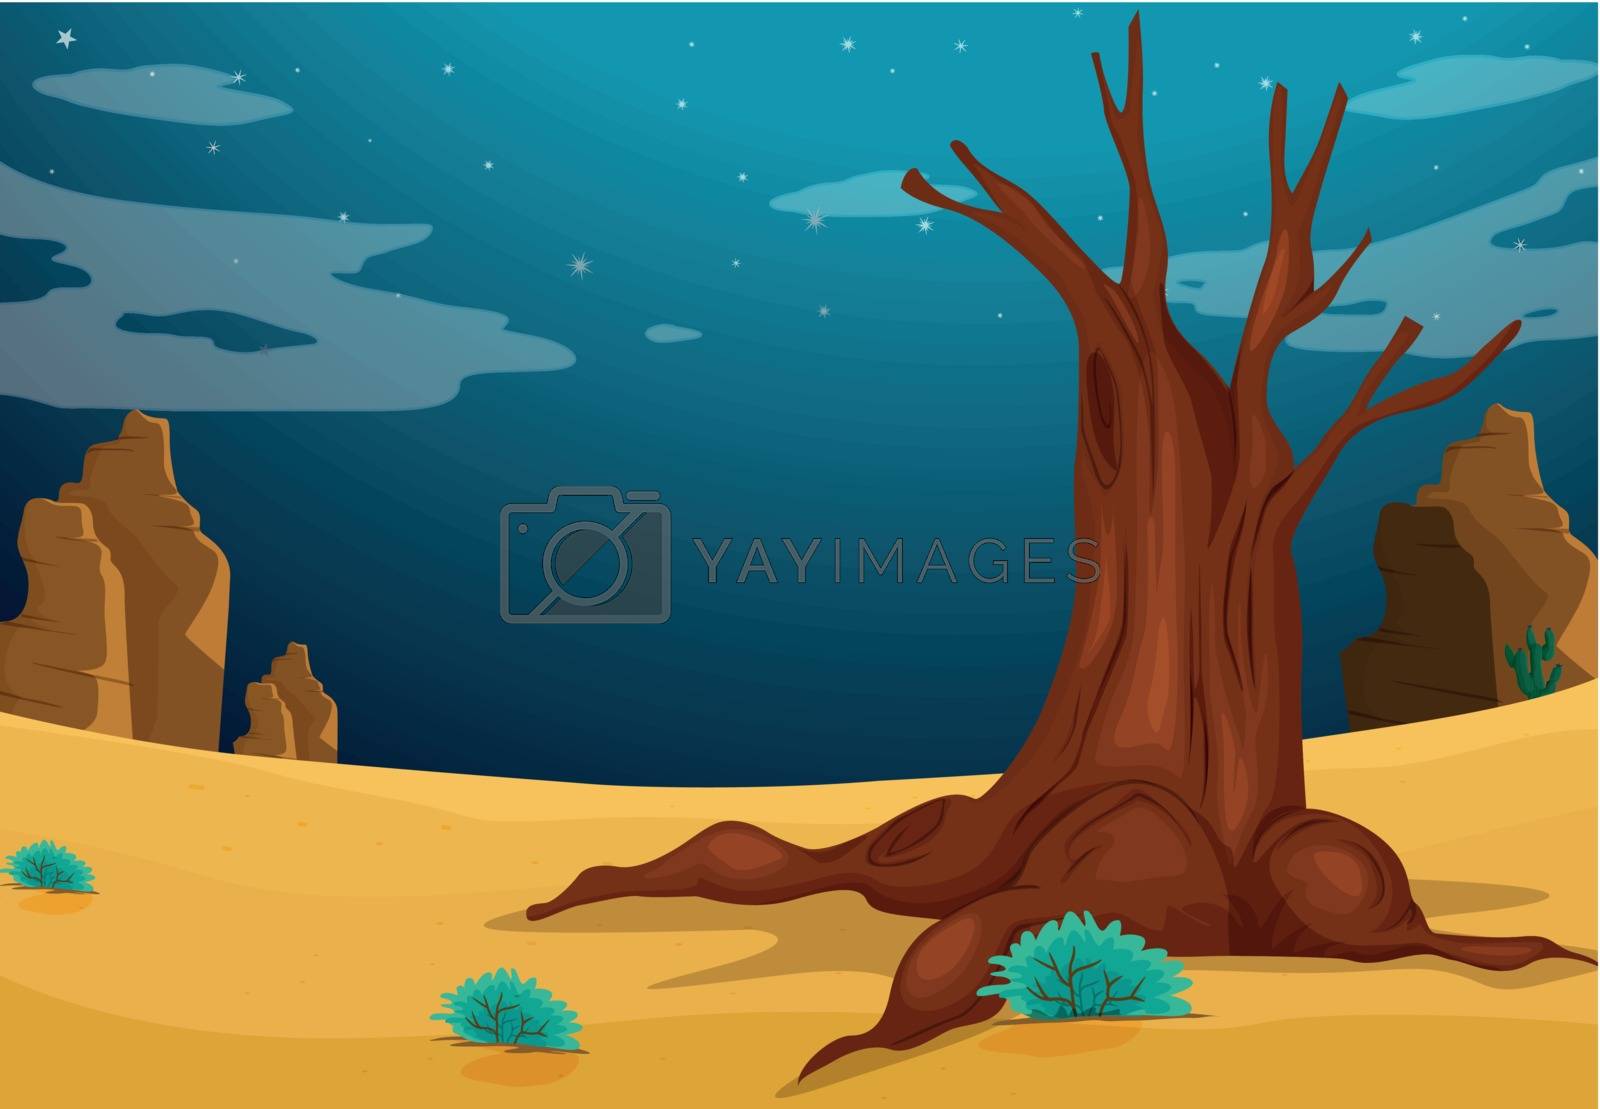 Royalty free image of A desert with a big tree by iimages